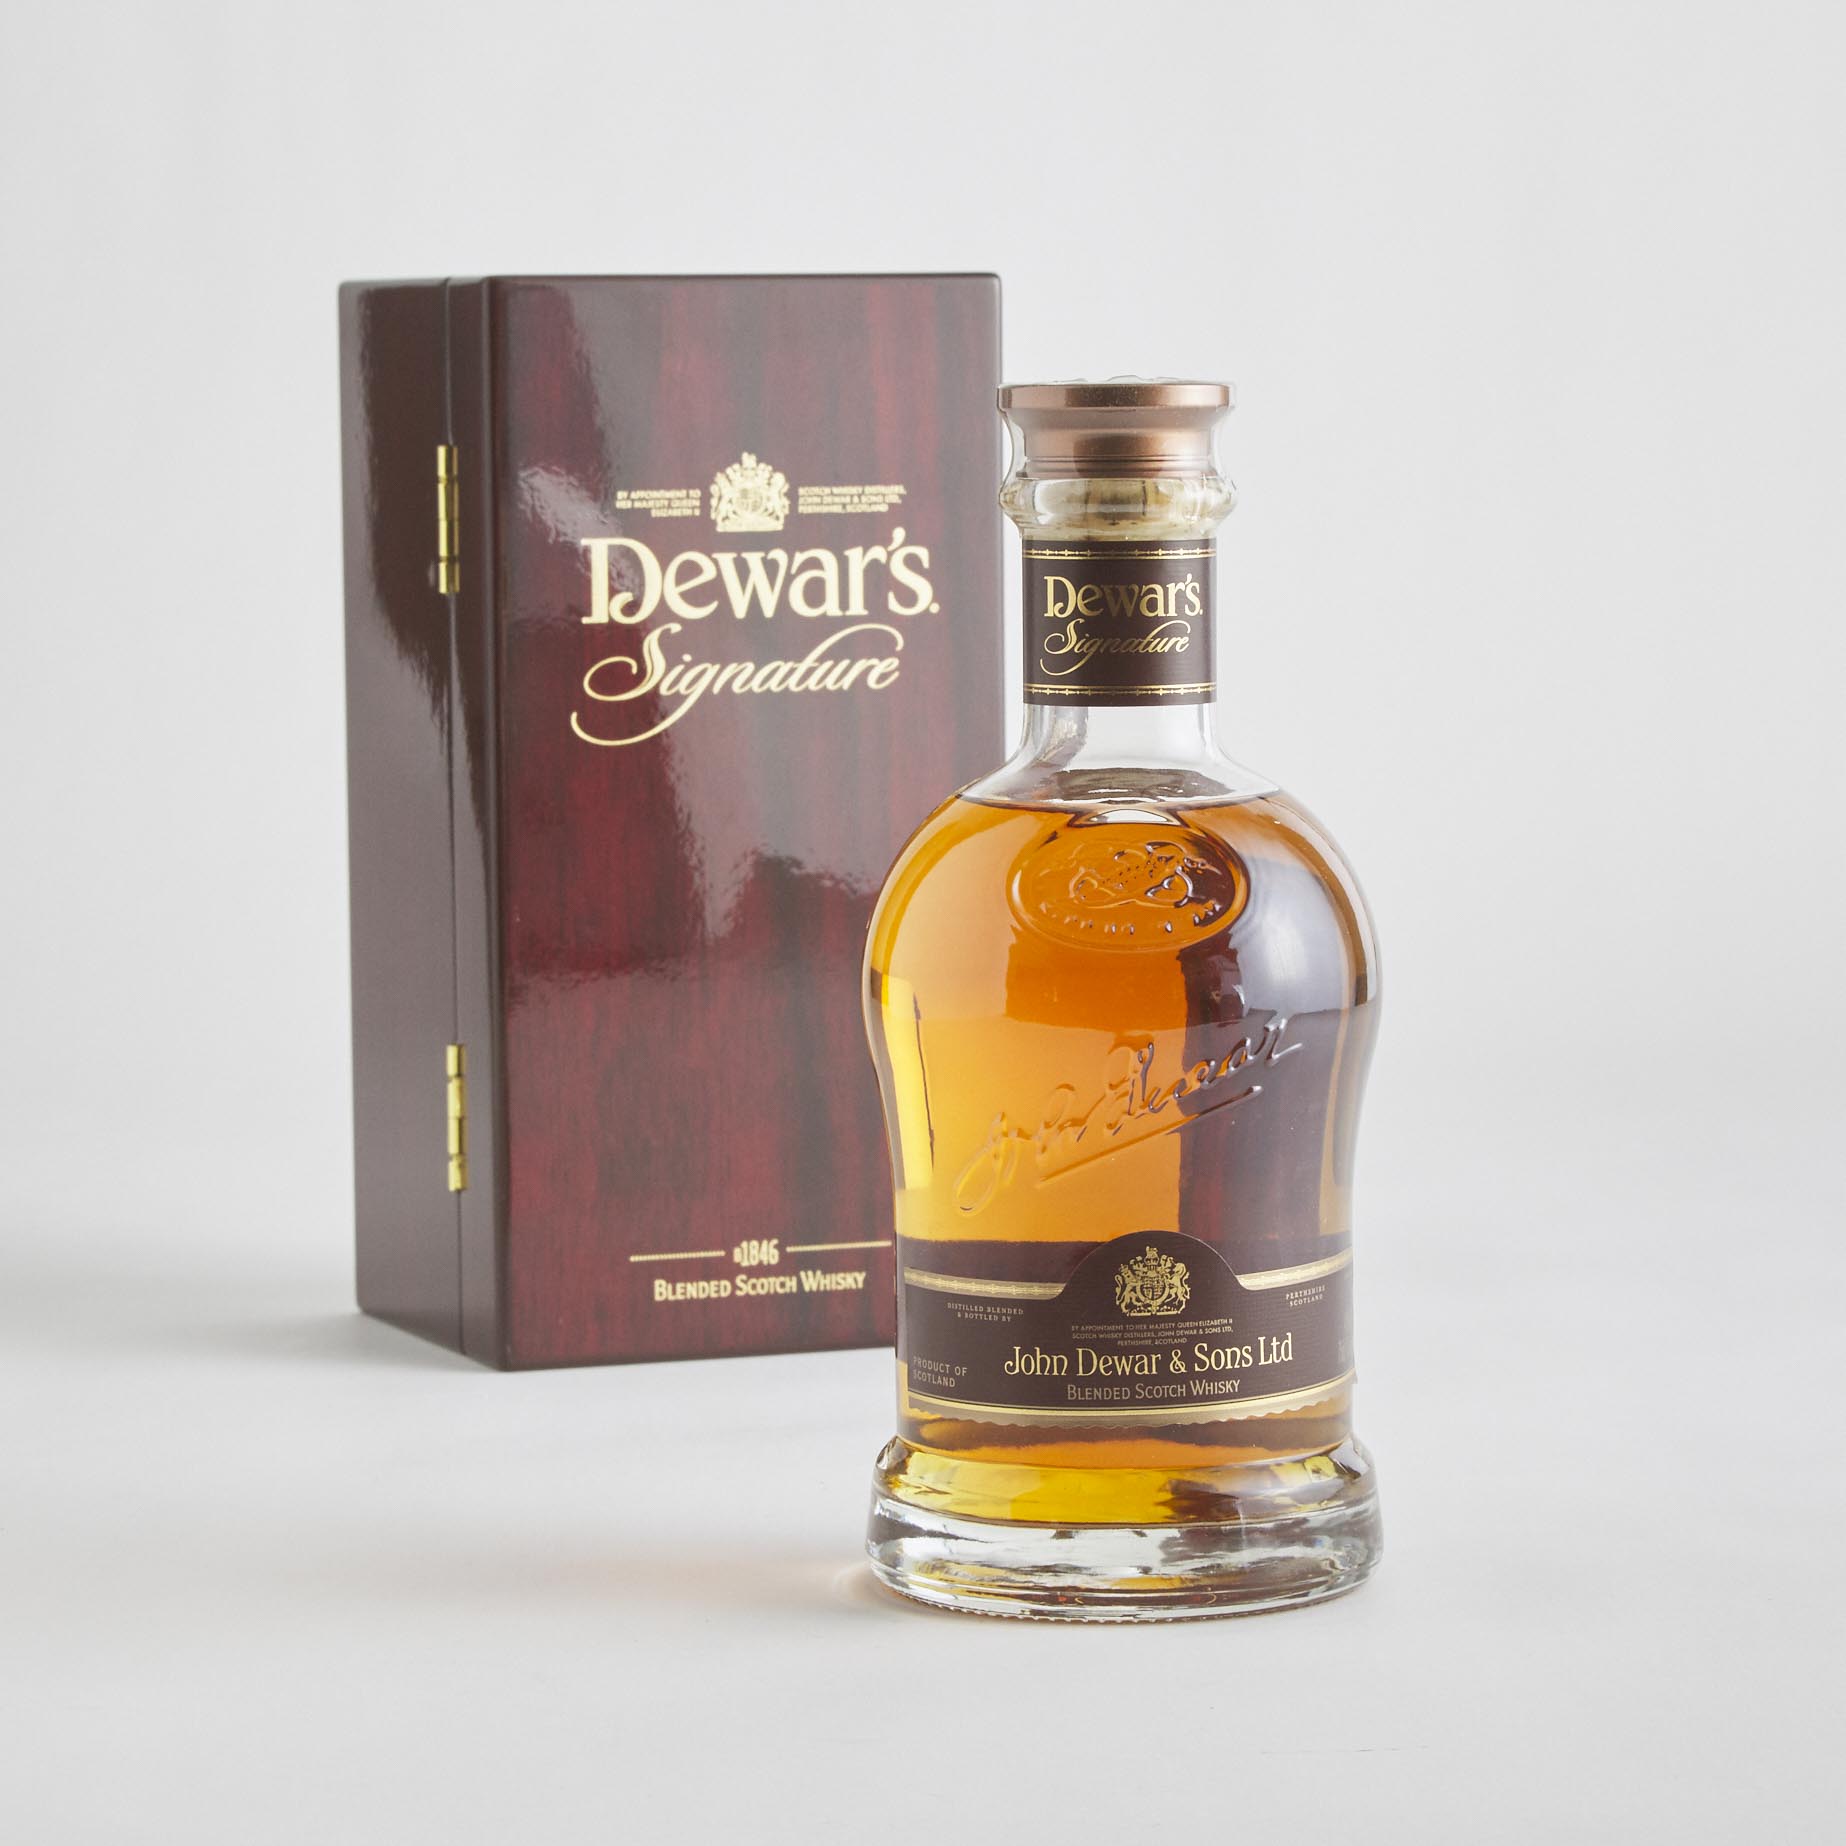 DEWAR'S SIGNATURE BLENDED SCOTCH WHISKY NAS (ONE 750 ML)